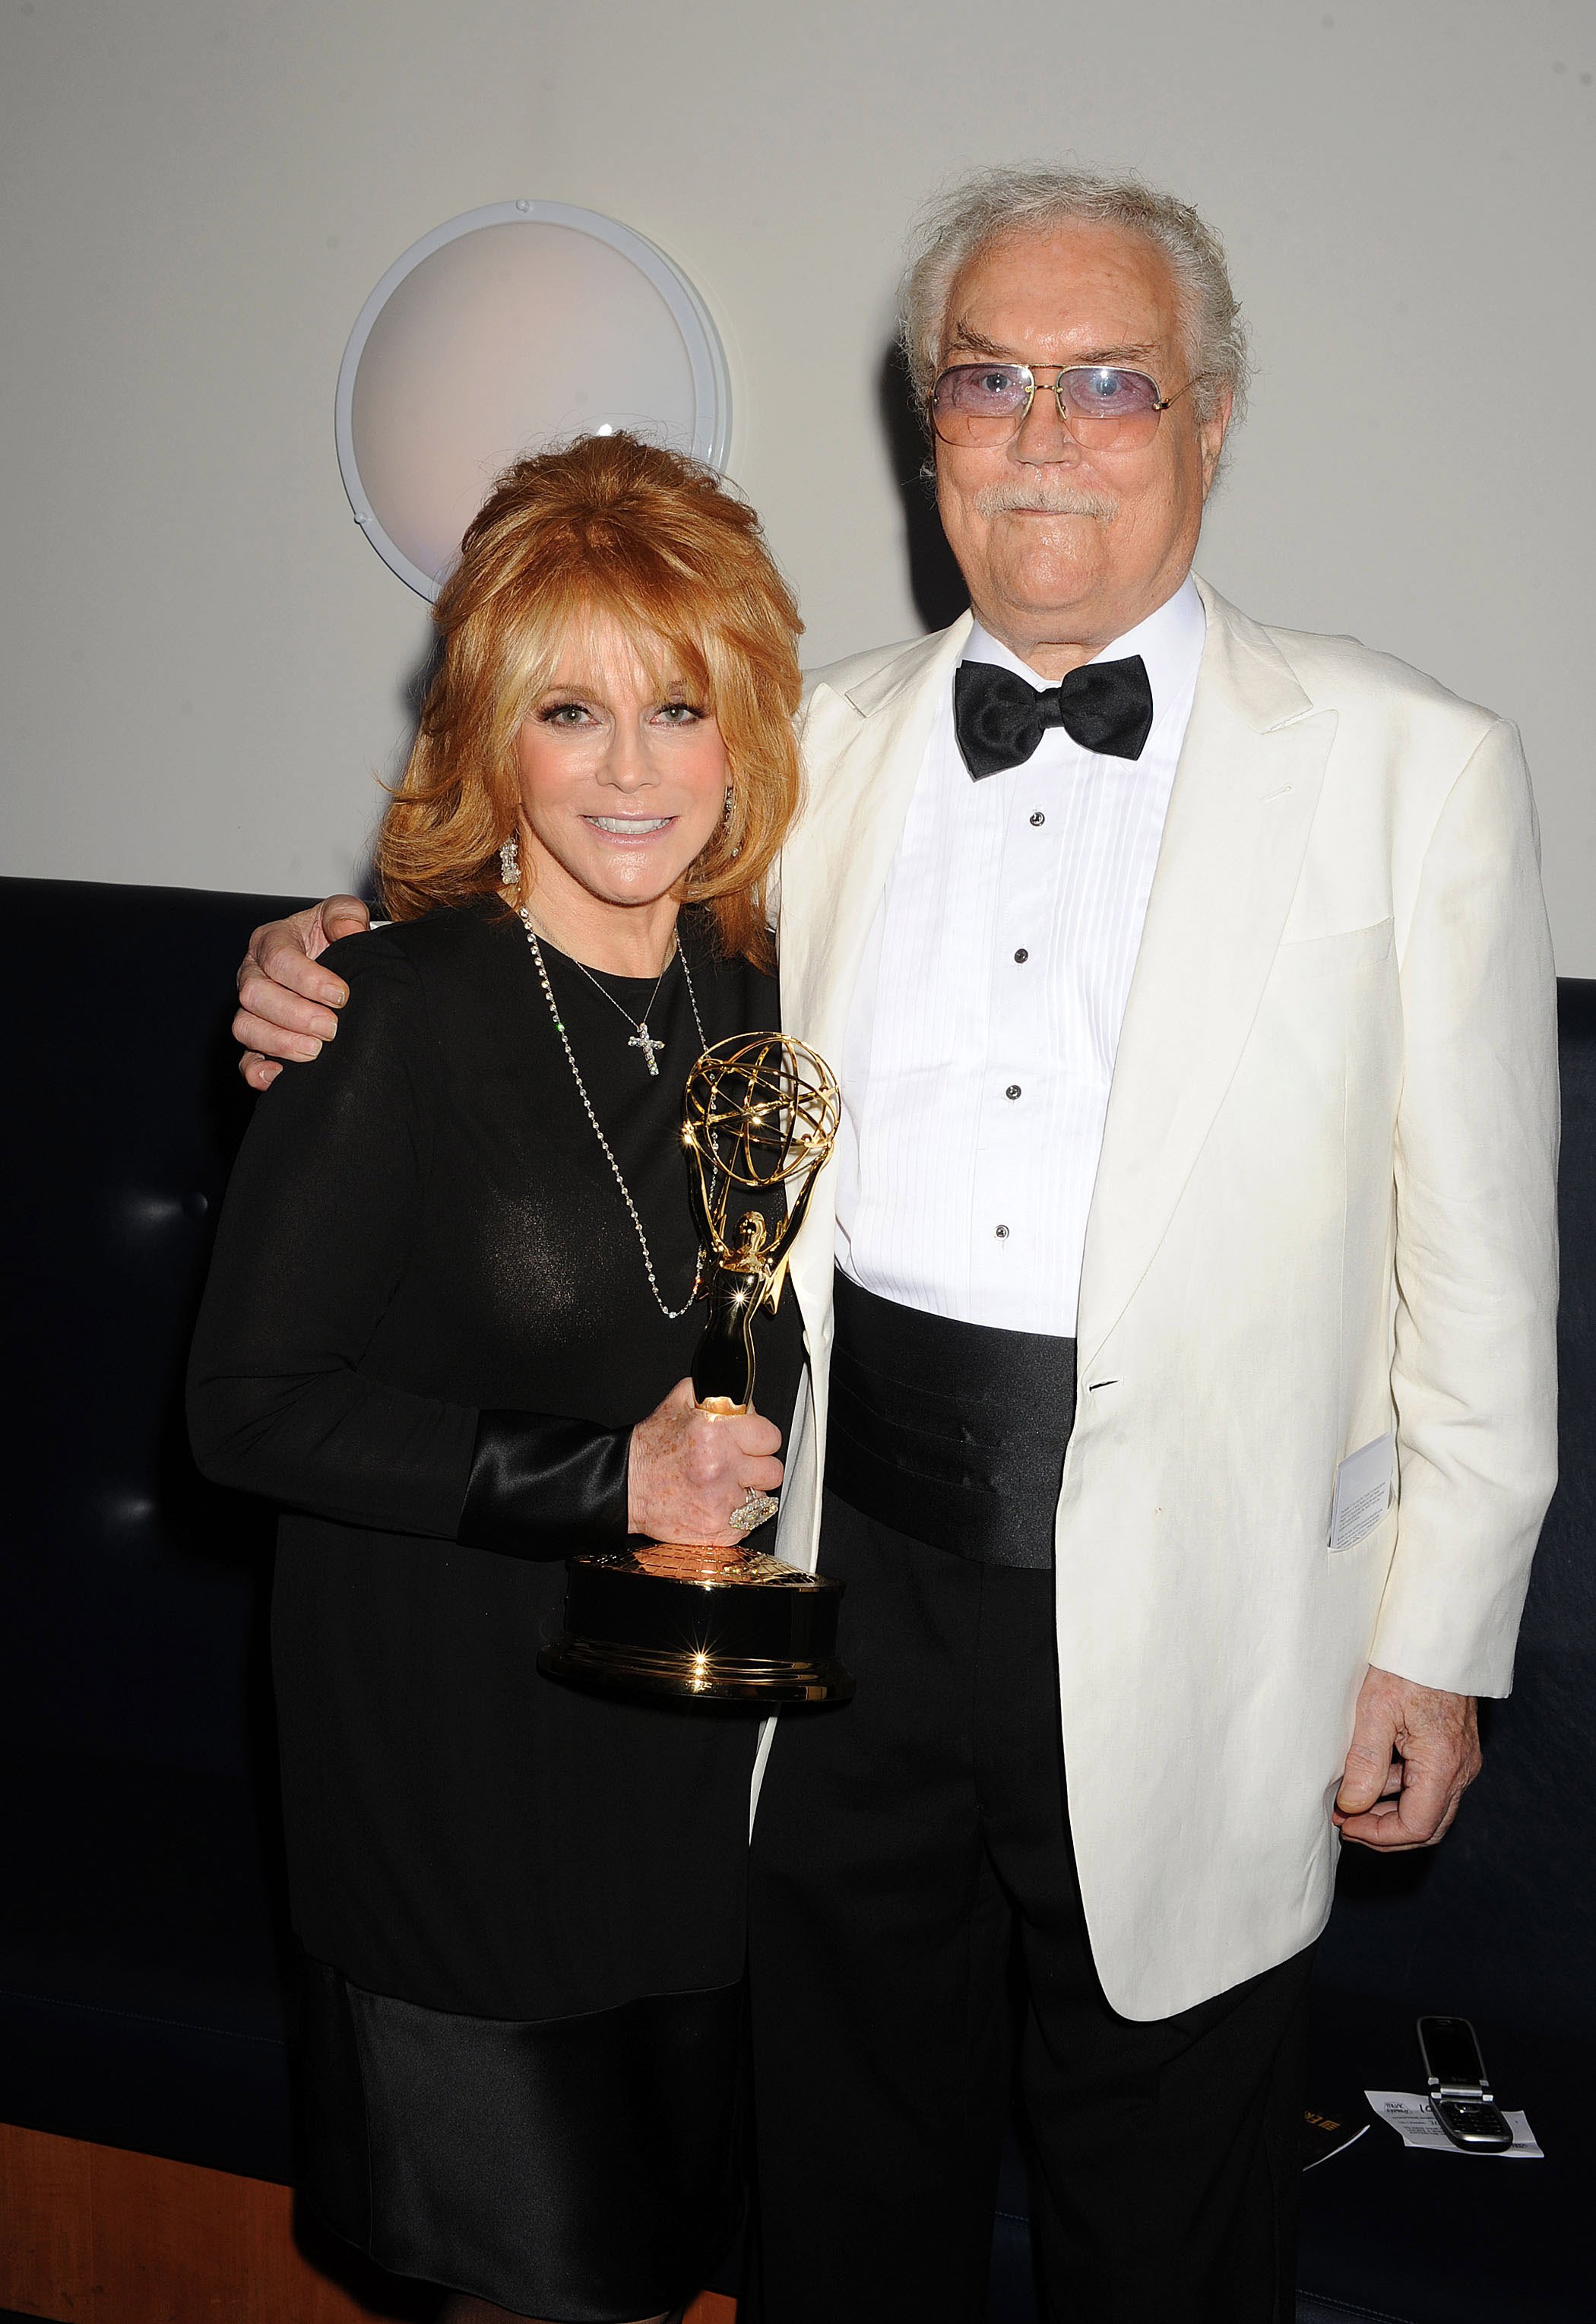 Ann-Margret and Roger Smith pose in the press room at the 2010 Creative Arts Emmy Awards at Nokia Theatre L.A. Live on August 21, 2010 in Los Angeles, California. / Source: Getty Images